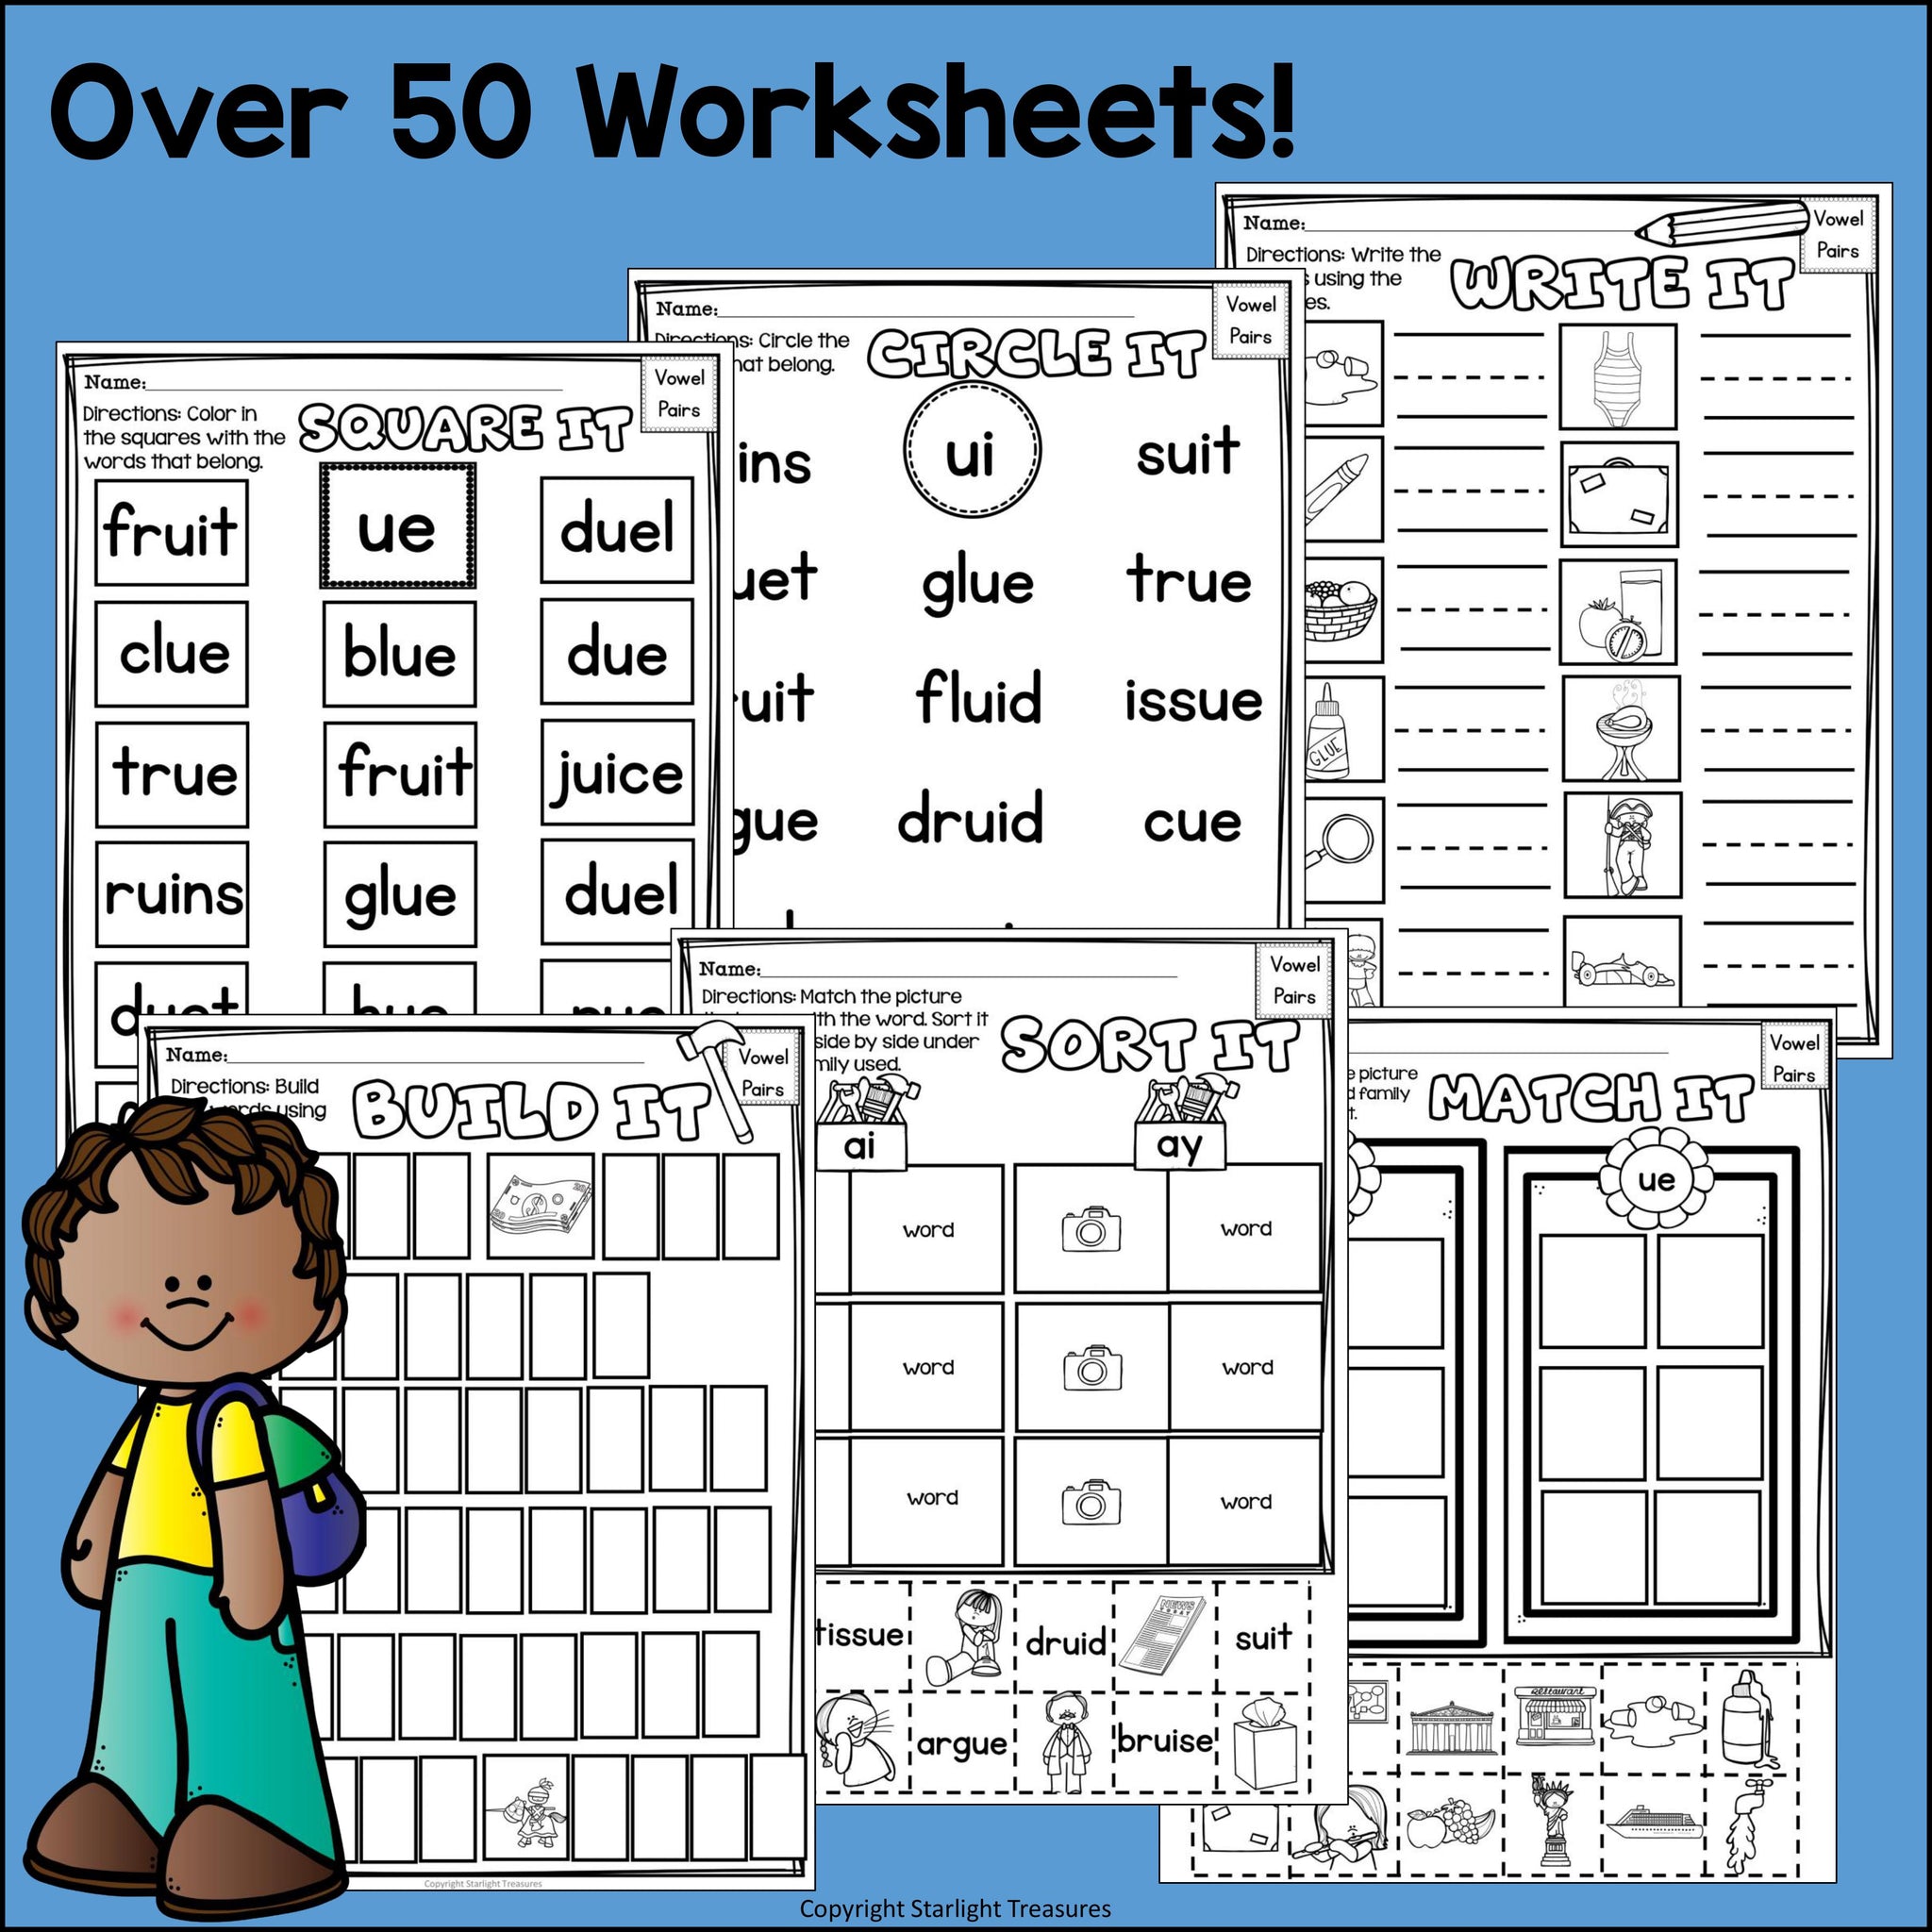 vowel-pairs-ue-ui-worksheets-and-activities-for-early-readers-phoni